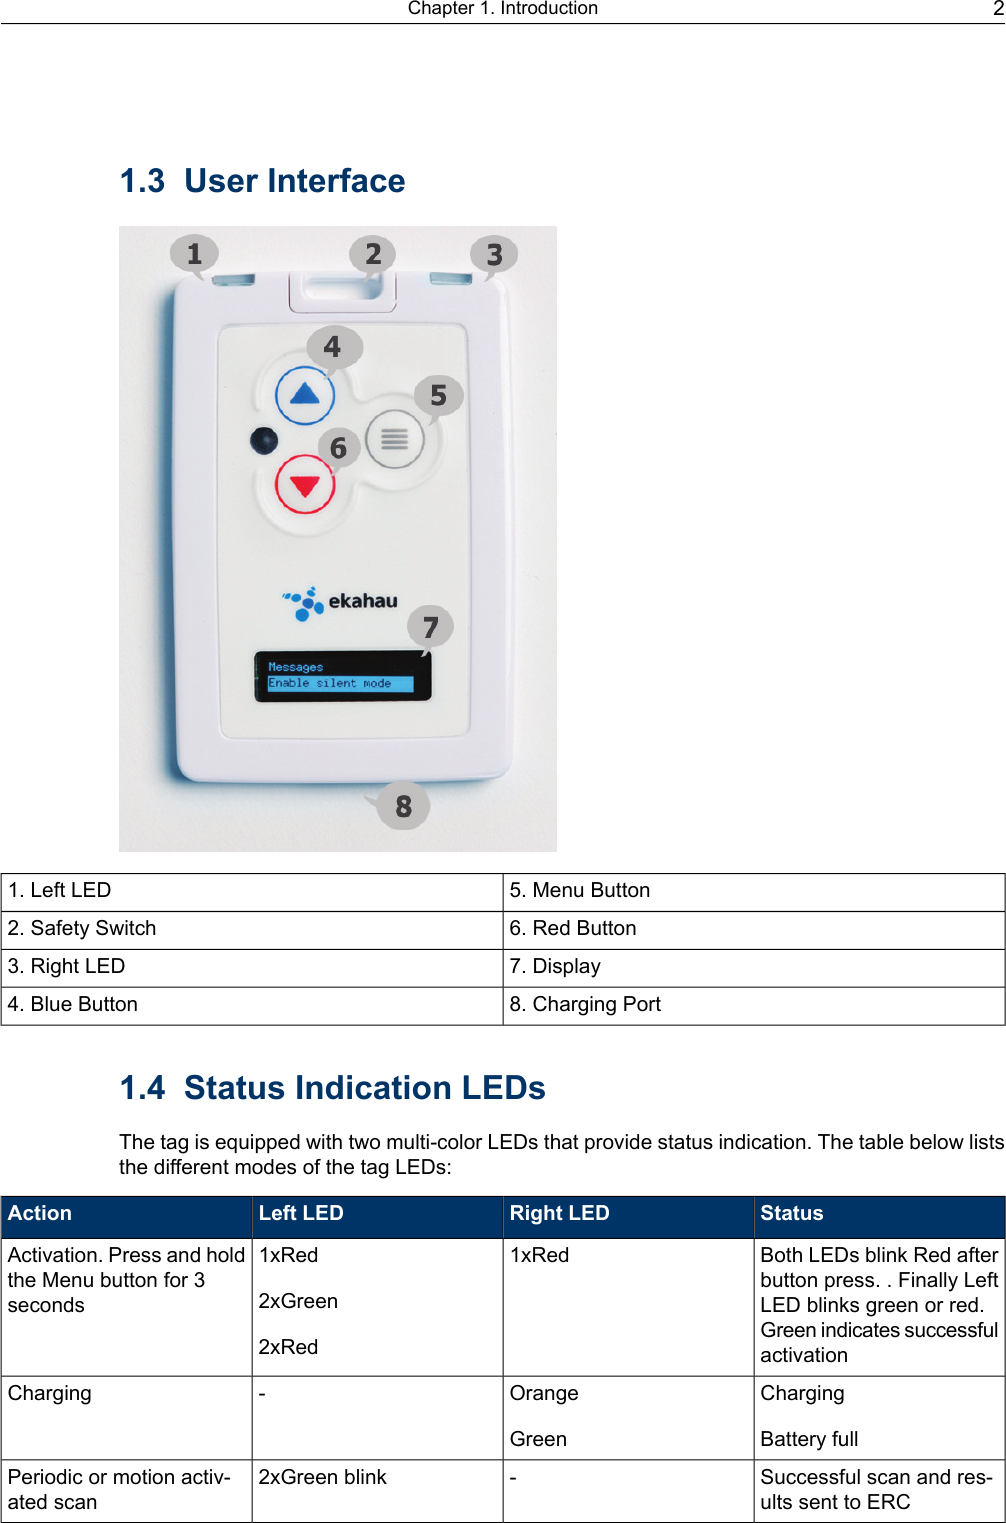 1.3 User Interface5. Menu Button1. Left LED6. Red Button2. Safety Switch7. Display3. Right LED8. Charging Port4. Blue Button1.4 Status Indication LEDsThe tag is equipped with two multi-color LEDs that provide status indication. The table below liststhe different modes of the tag LEDs:StatusRight LEDLeft LEDActionBoth LEDs blink Red afterbutton press. . Finally LeftLED blinks green or red.Green indicates successfulactivation1xRed1xRed2xGreen2xRedActivation. Press and holdthe Menu button for 3secondsChargingBattery fullOrangeGreen-ChargingSuccessful scan and res-ults sent to ERC-2xGreen blinkPeriodic or motion activ-ated scan2Chapter 1. Introduction